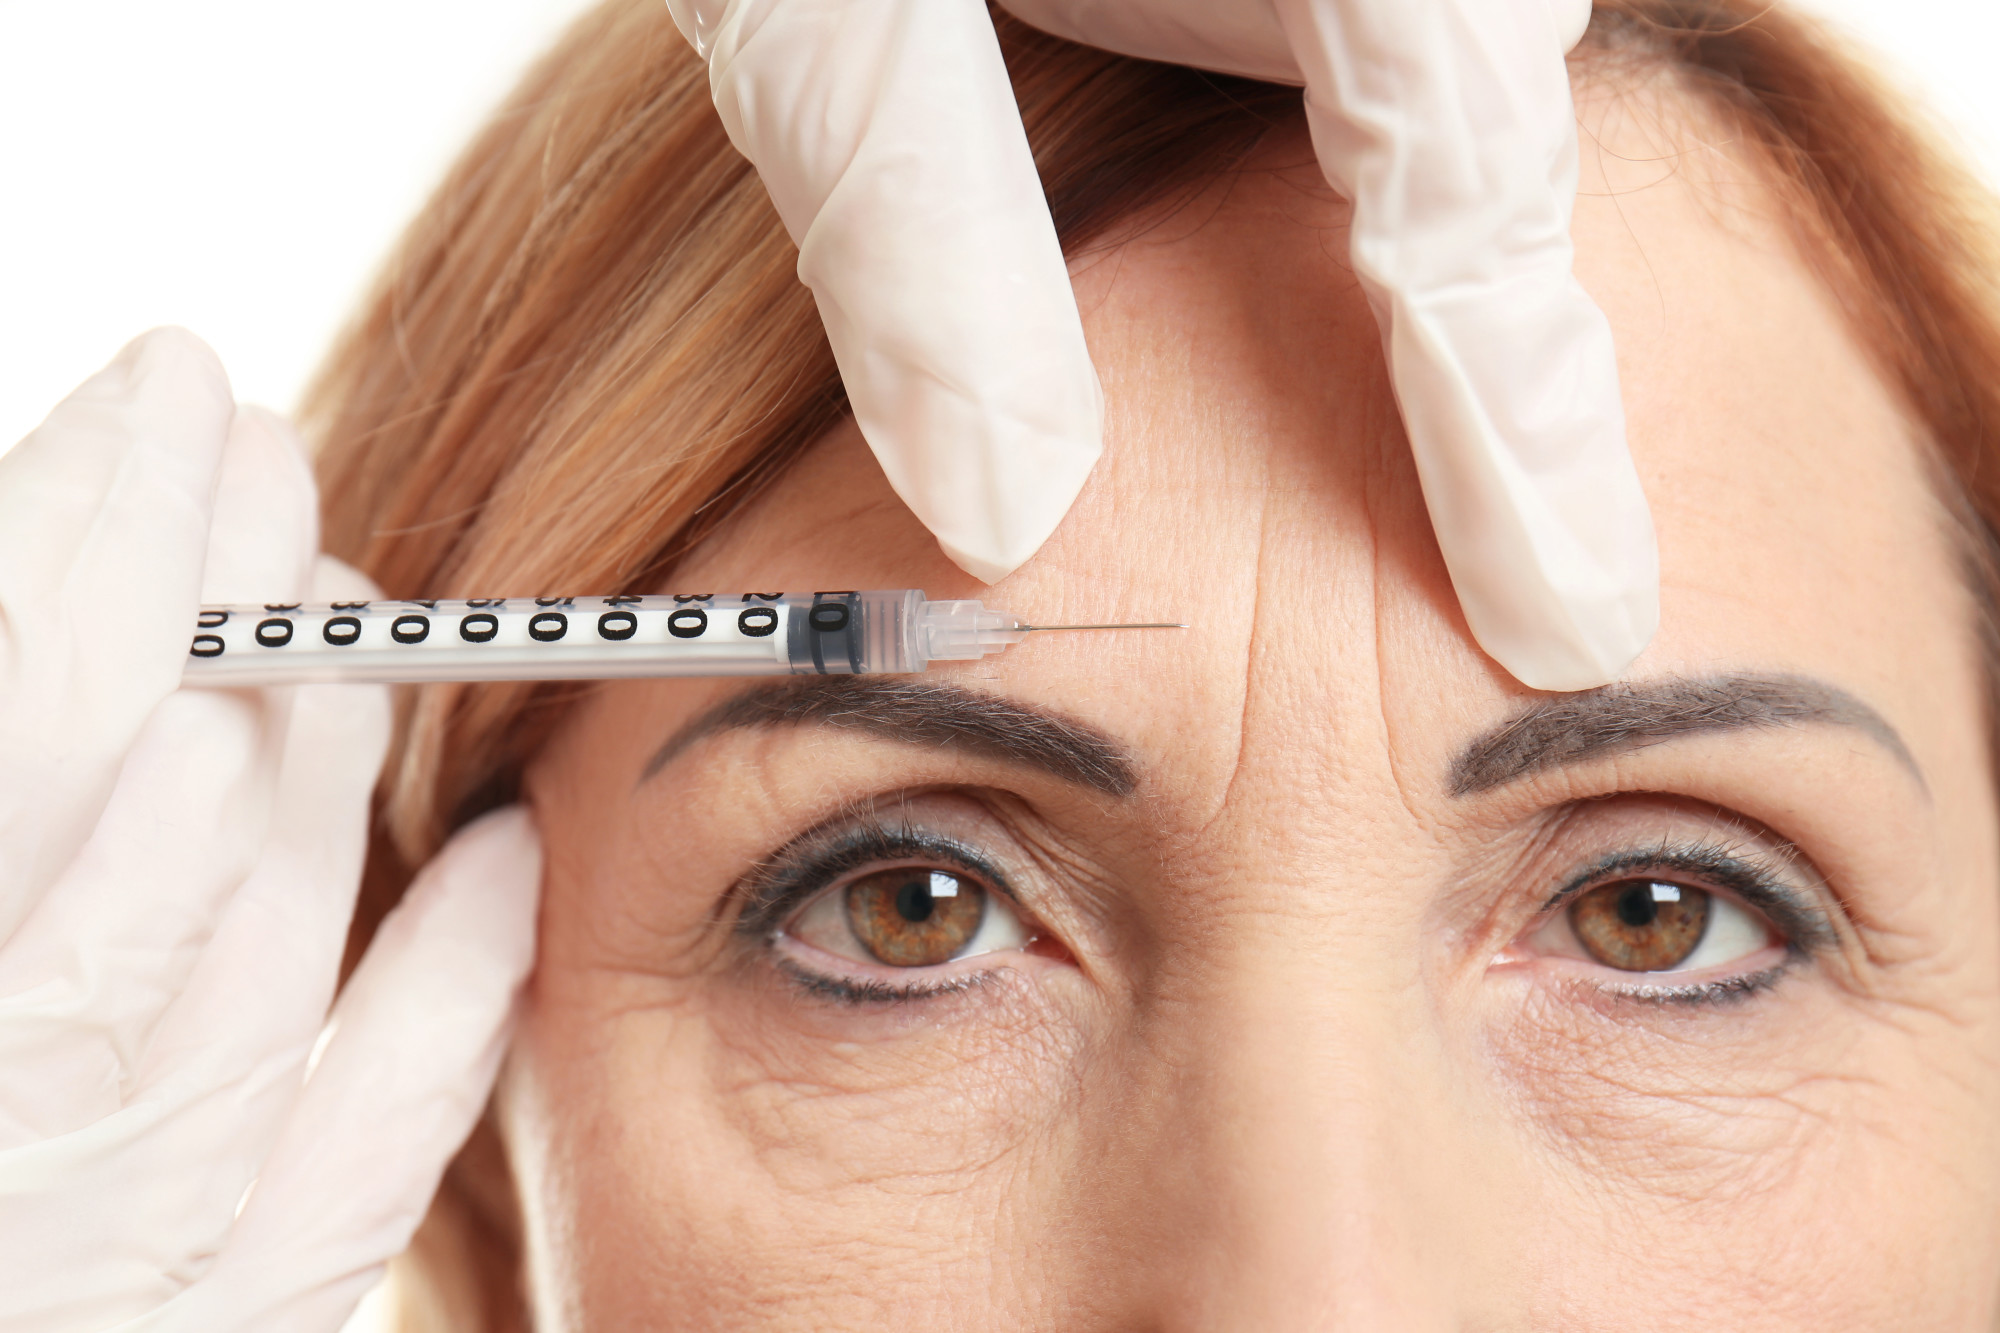 Are there different size needles for Botox? What size needle is best for Botox? Click here to learn all you need to know about Botox needle size.